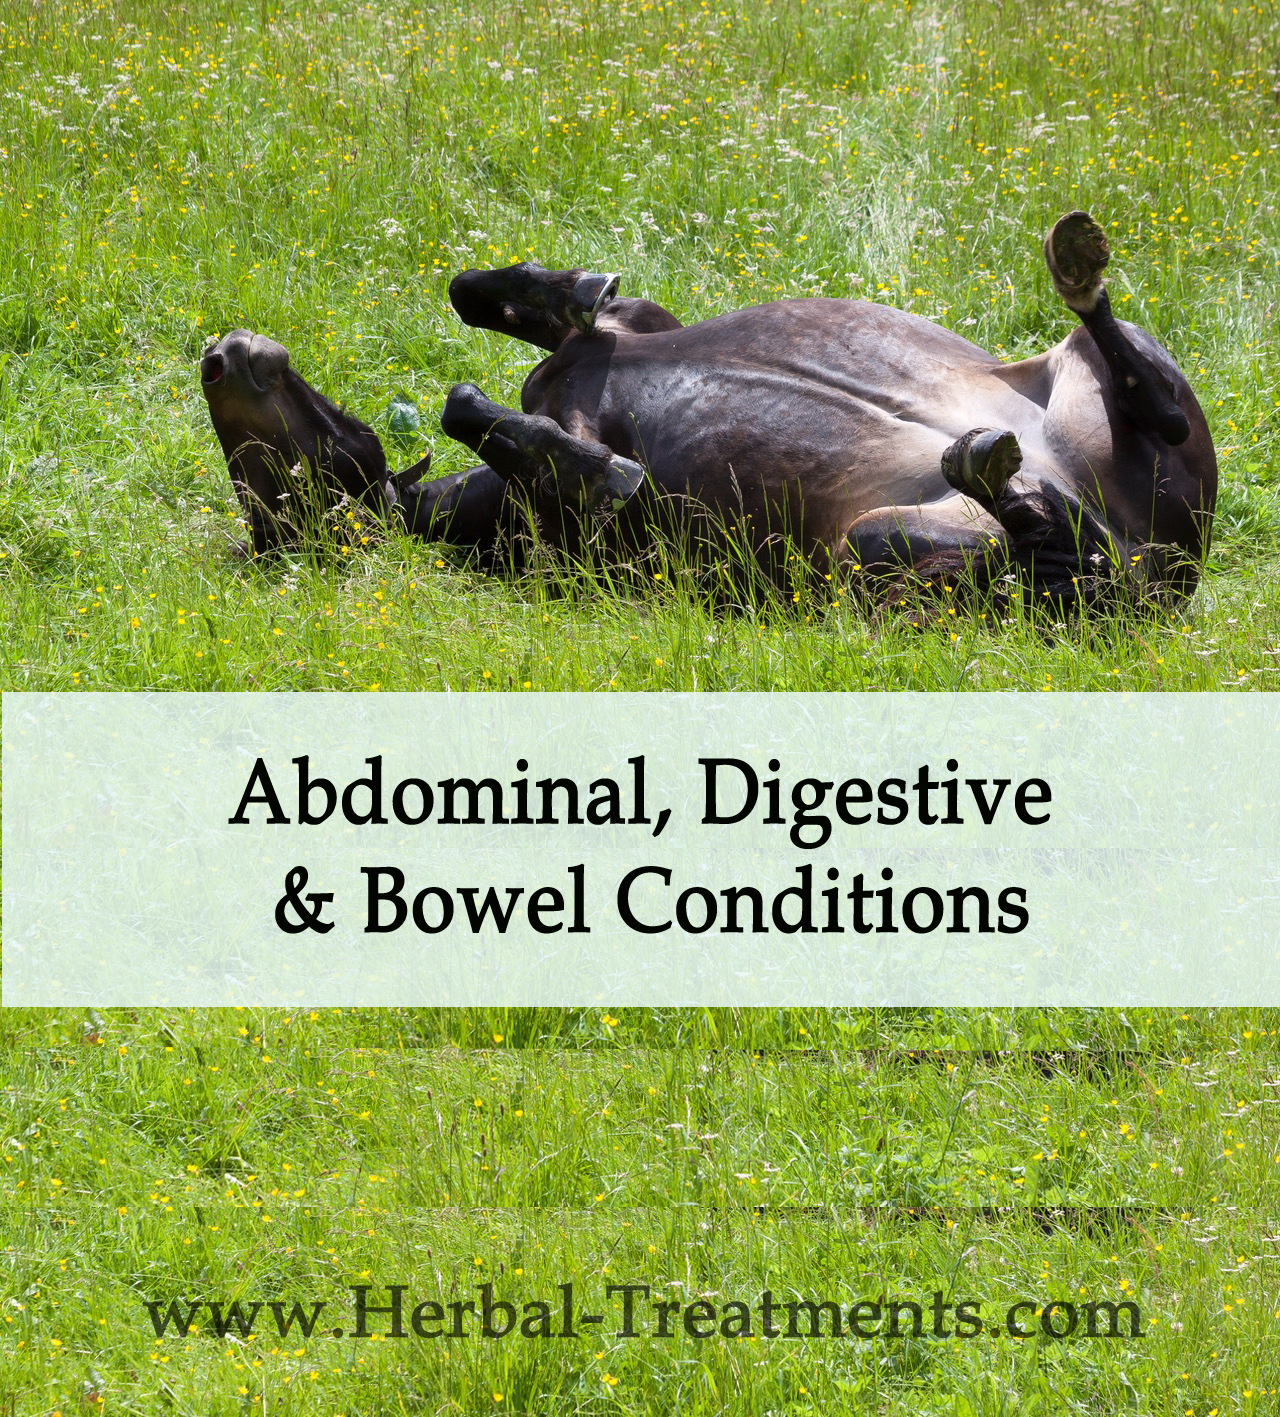 Herbal Treatments for Equine Abdominal, Digestive and Bowel Conditions